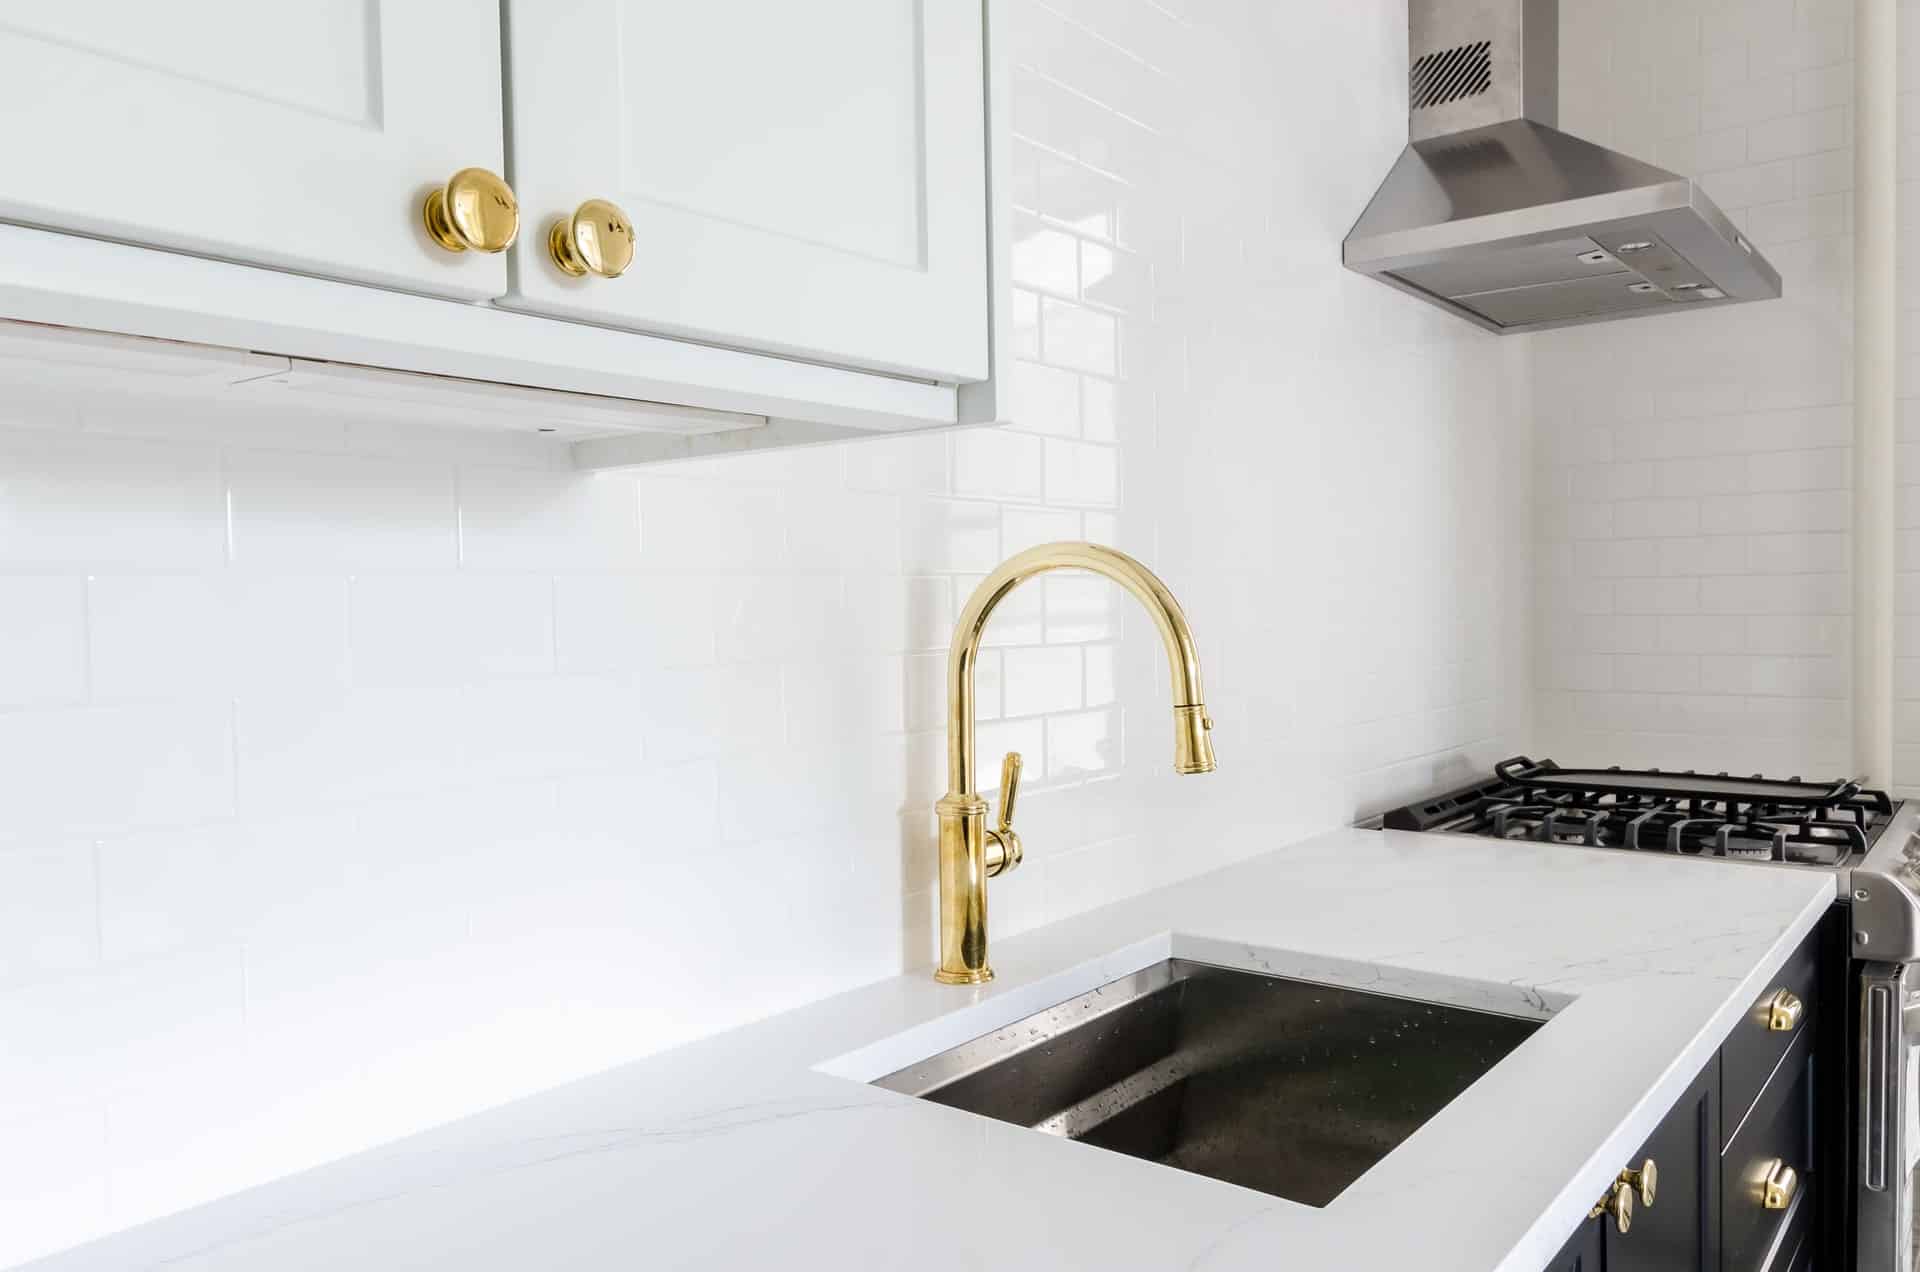 Stainless-Steel Countertops: Advantages, Cost, Care, and More